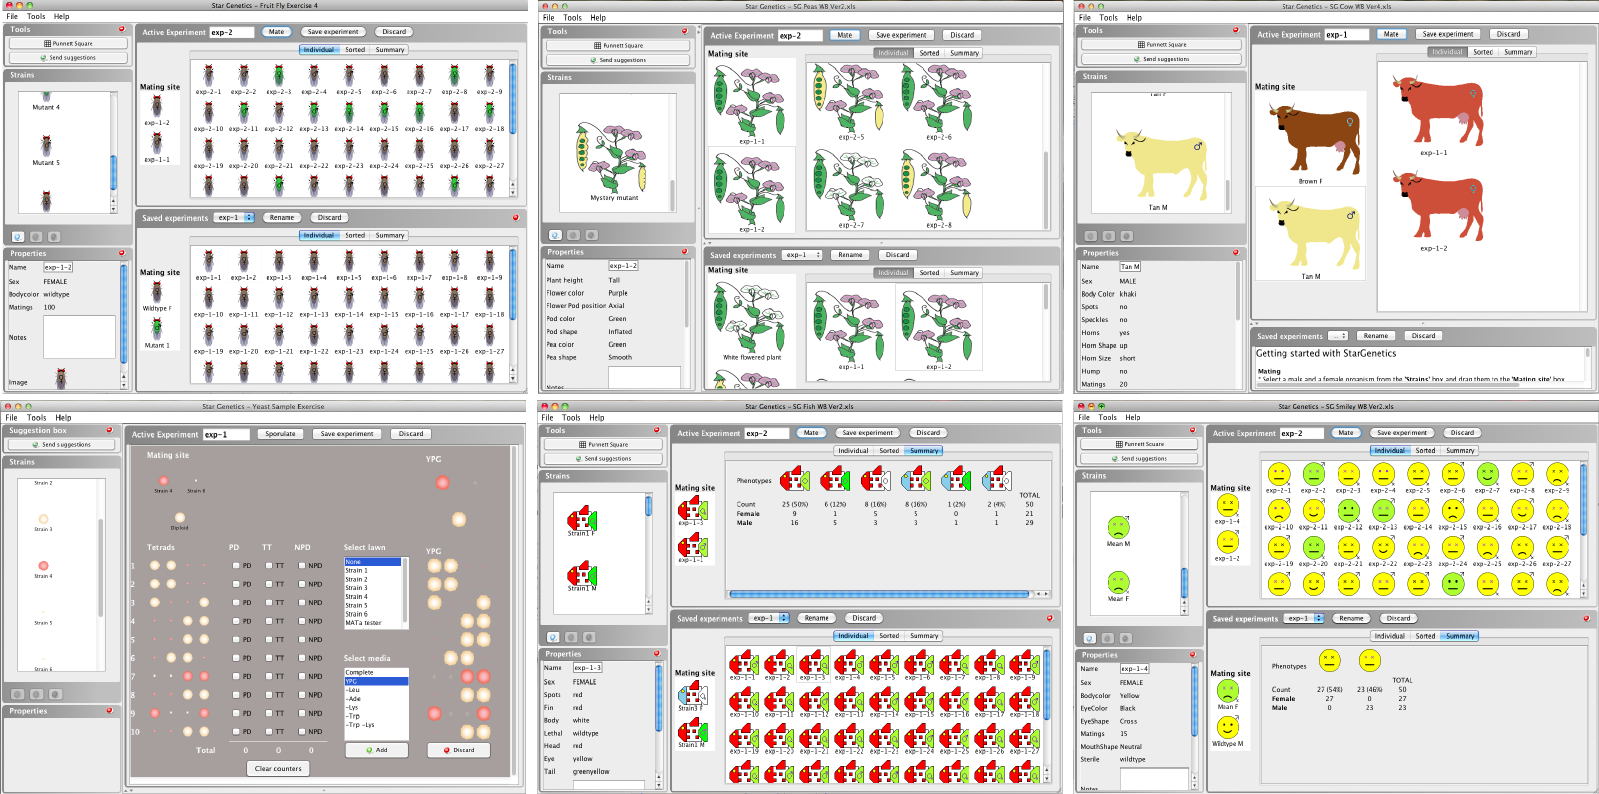 Current StarGenetics Visualizers which includes Fly, Yeast, Mendel's Peas, Cows, Fish and Smiley Face